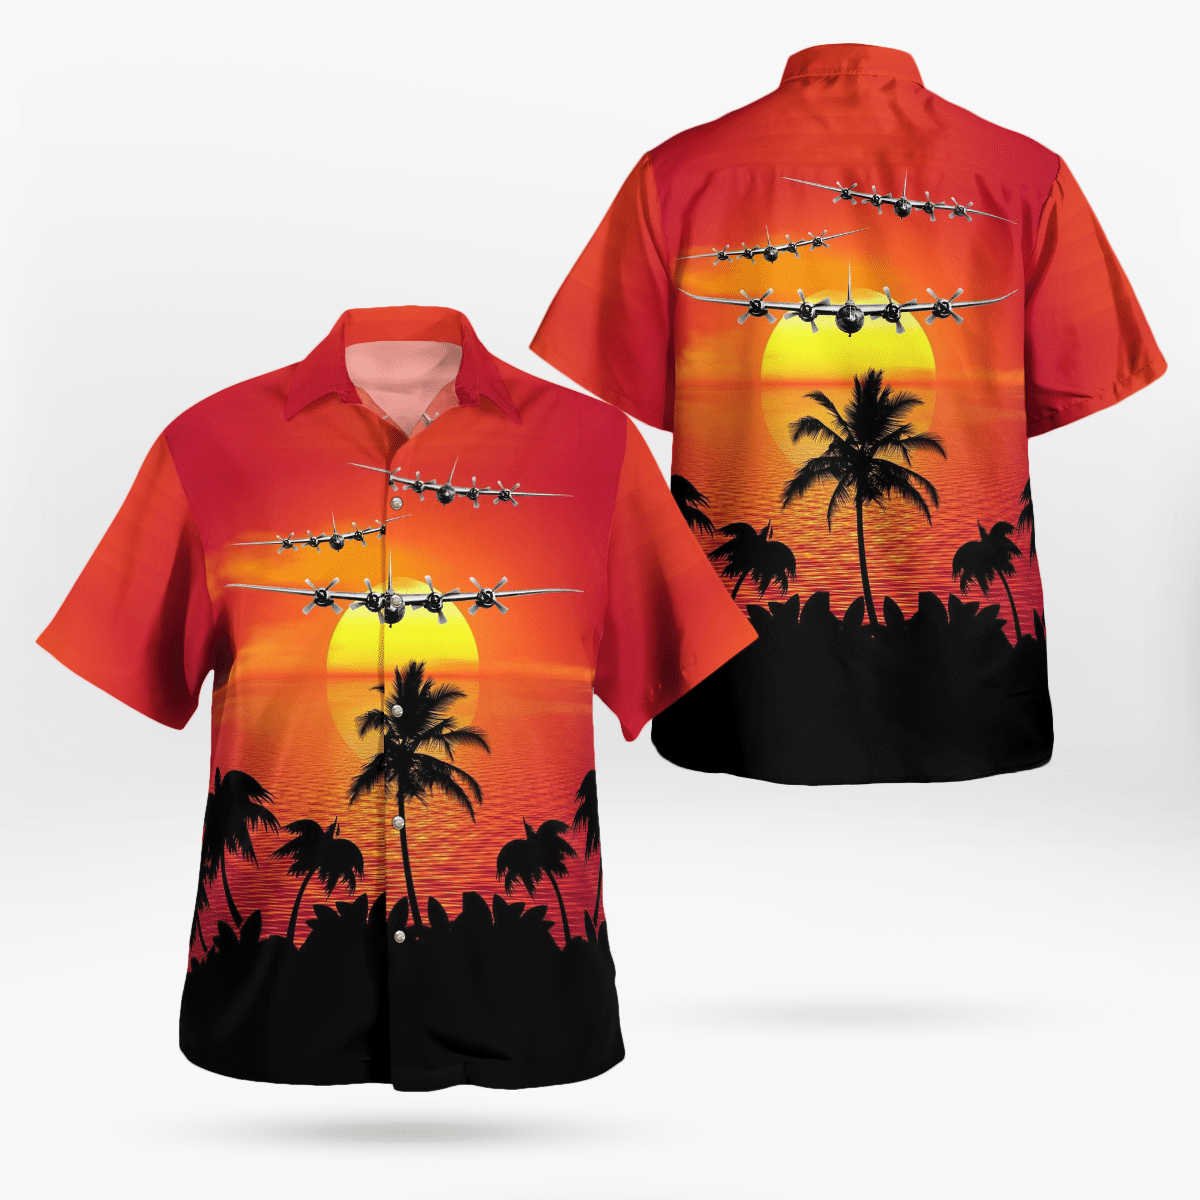 Shop now to find the perfect Hawaii Shirt for your hobby 83